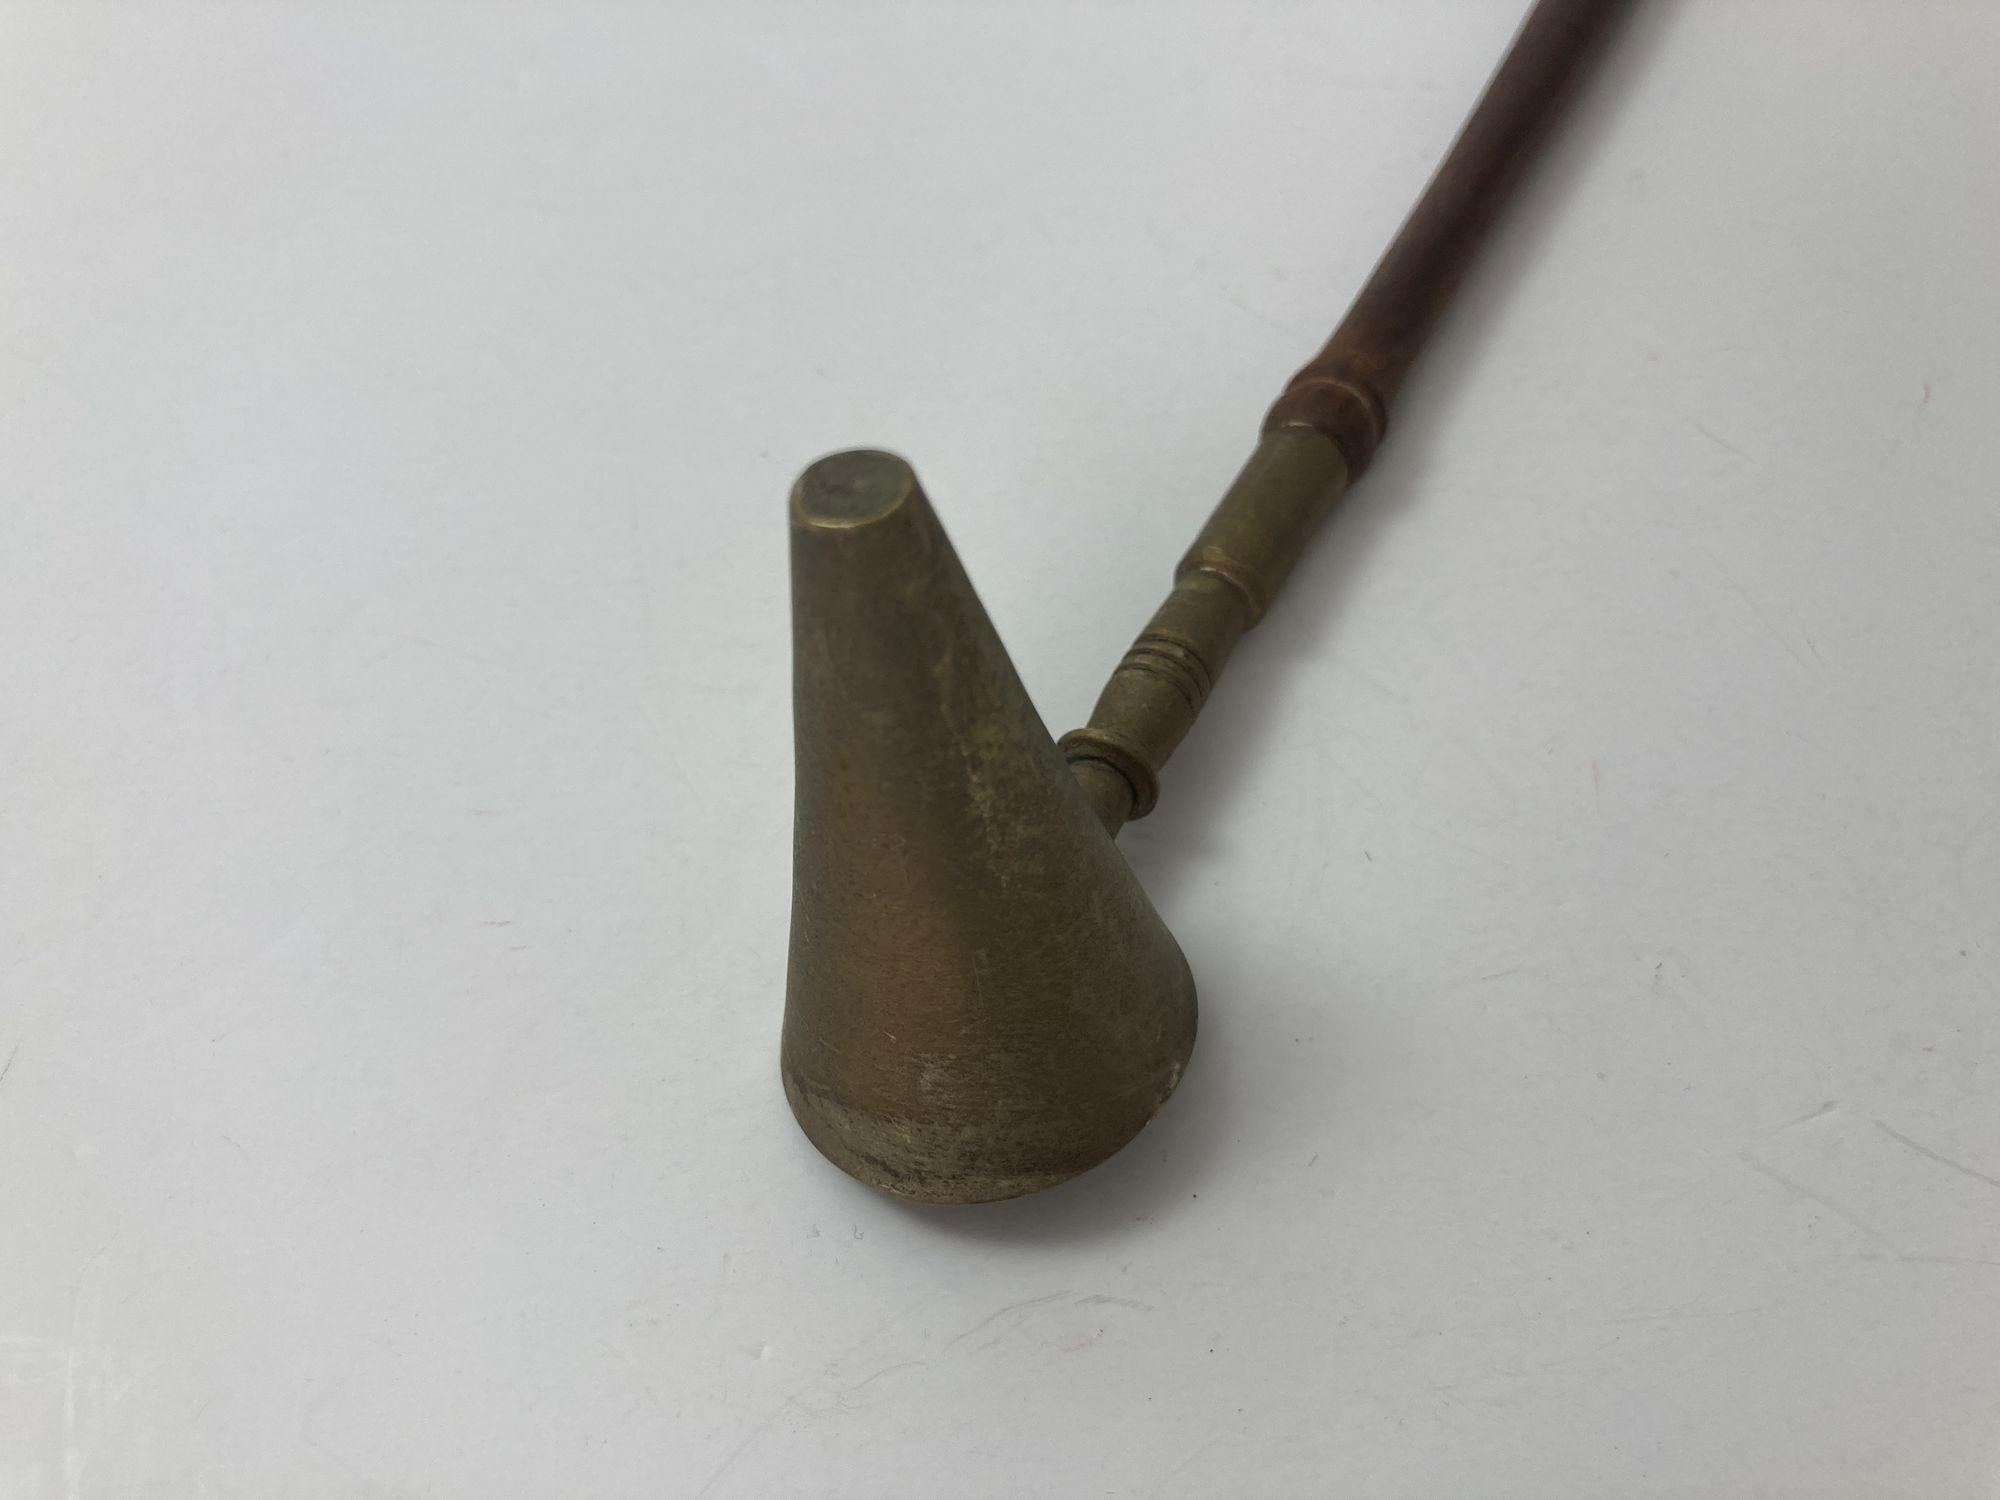 Antique Metal and Wooden Handle Candle Snuffer In Good Condition For Sale In North Hollywood, CA